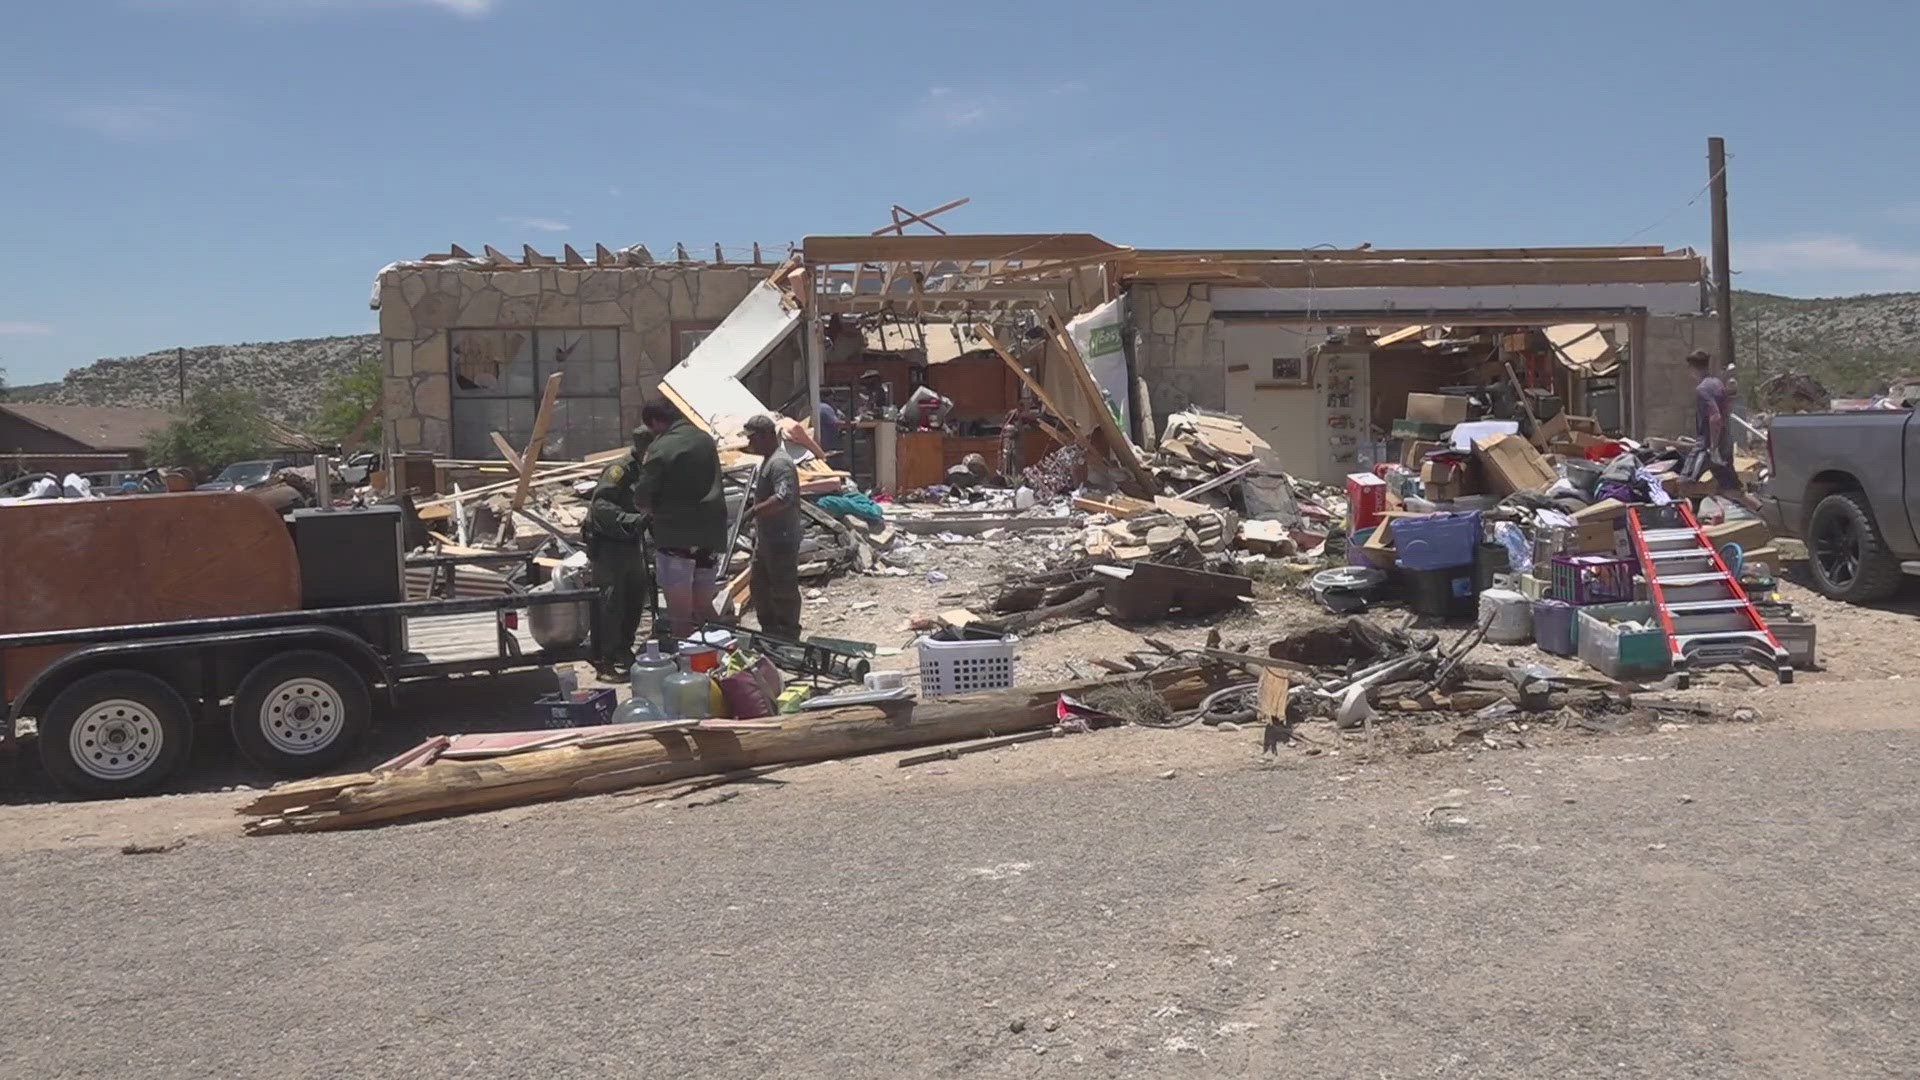 The 'Lomita Terrace' area west of town was hit the hardest. Their spirit is not broken as recovery efforts begin.